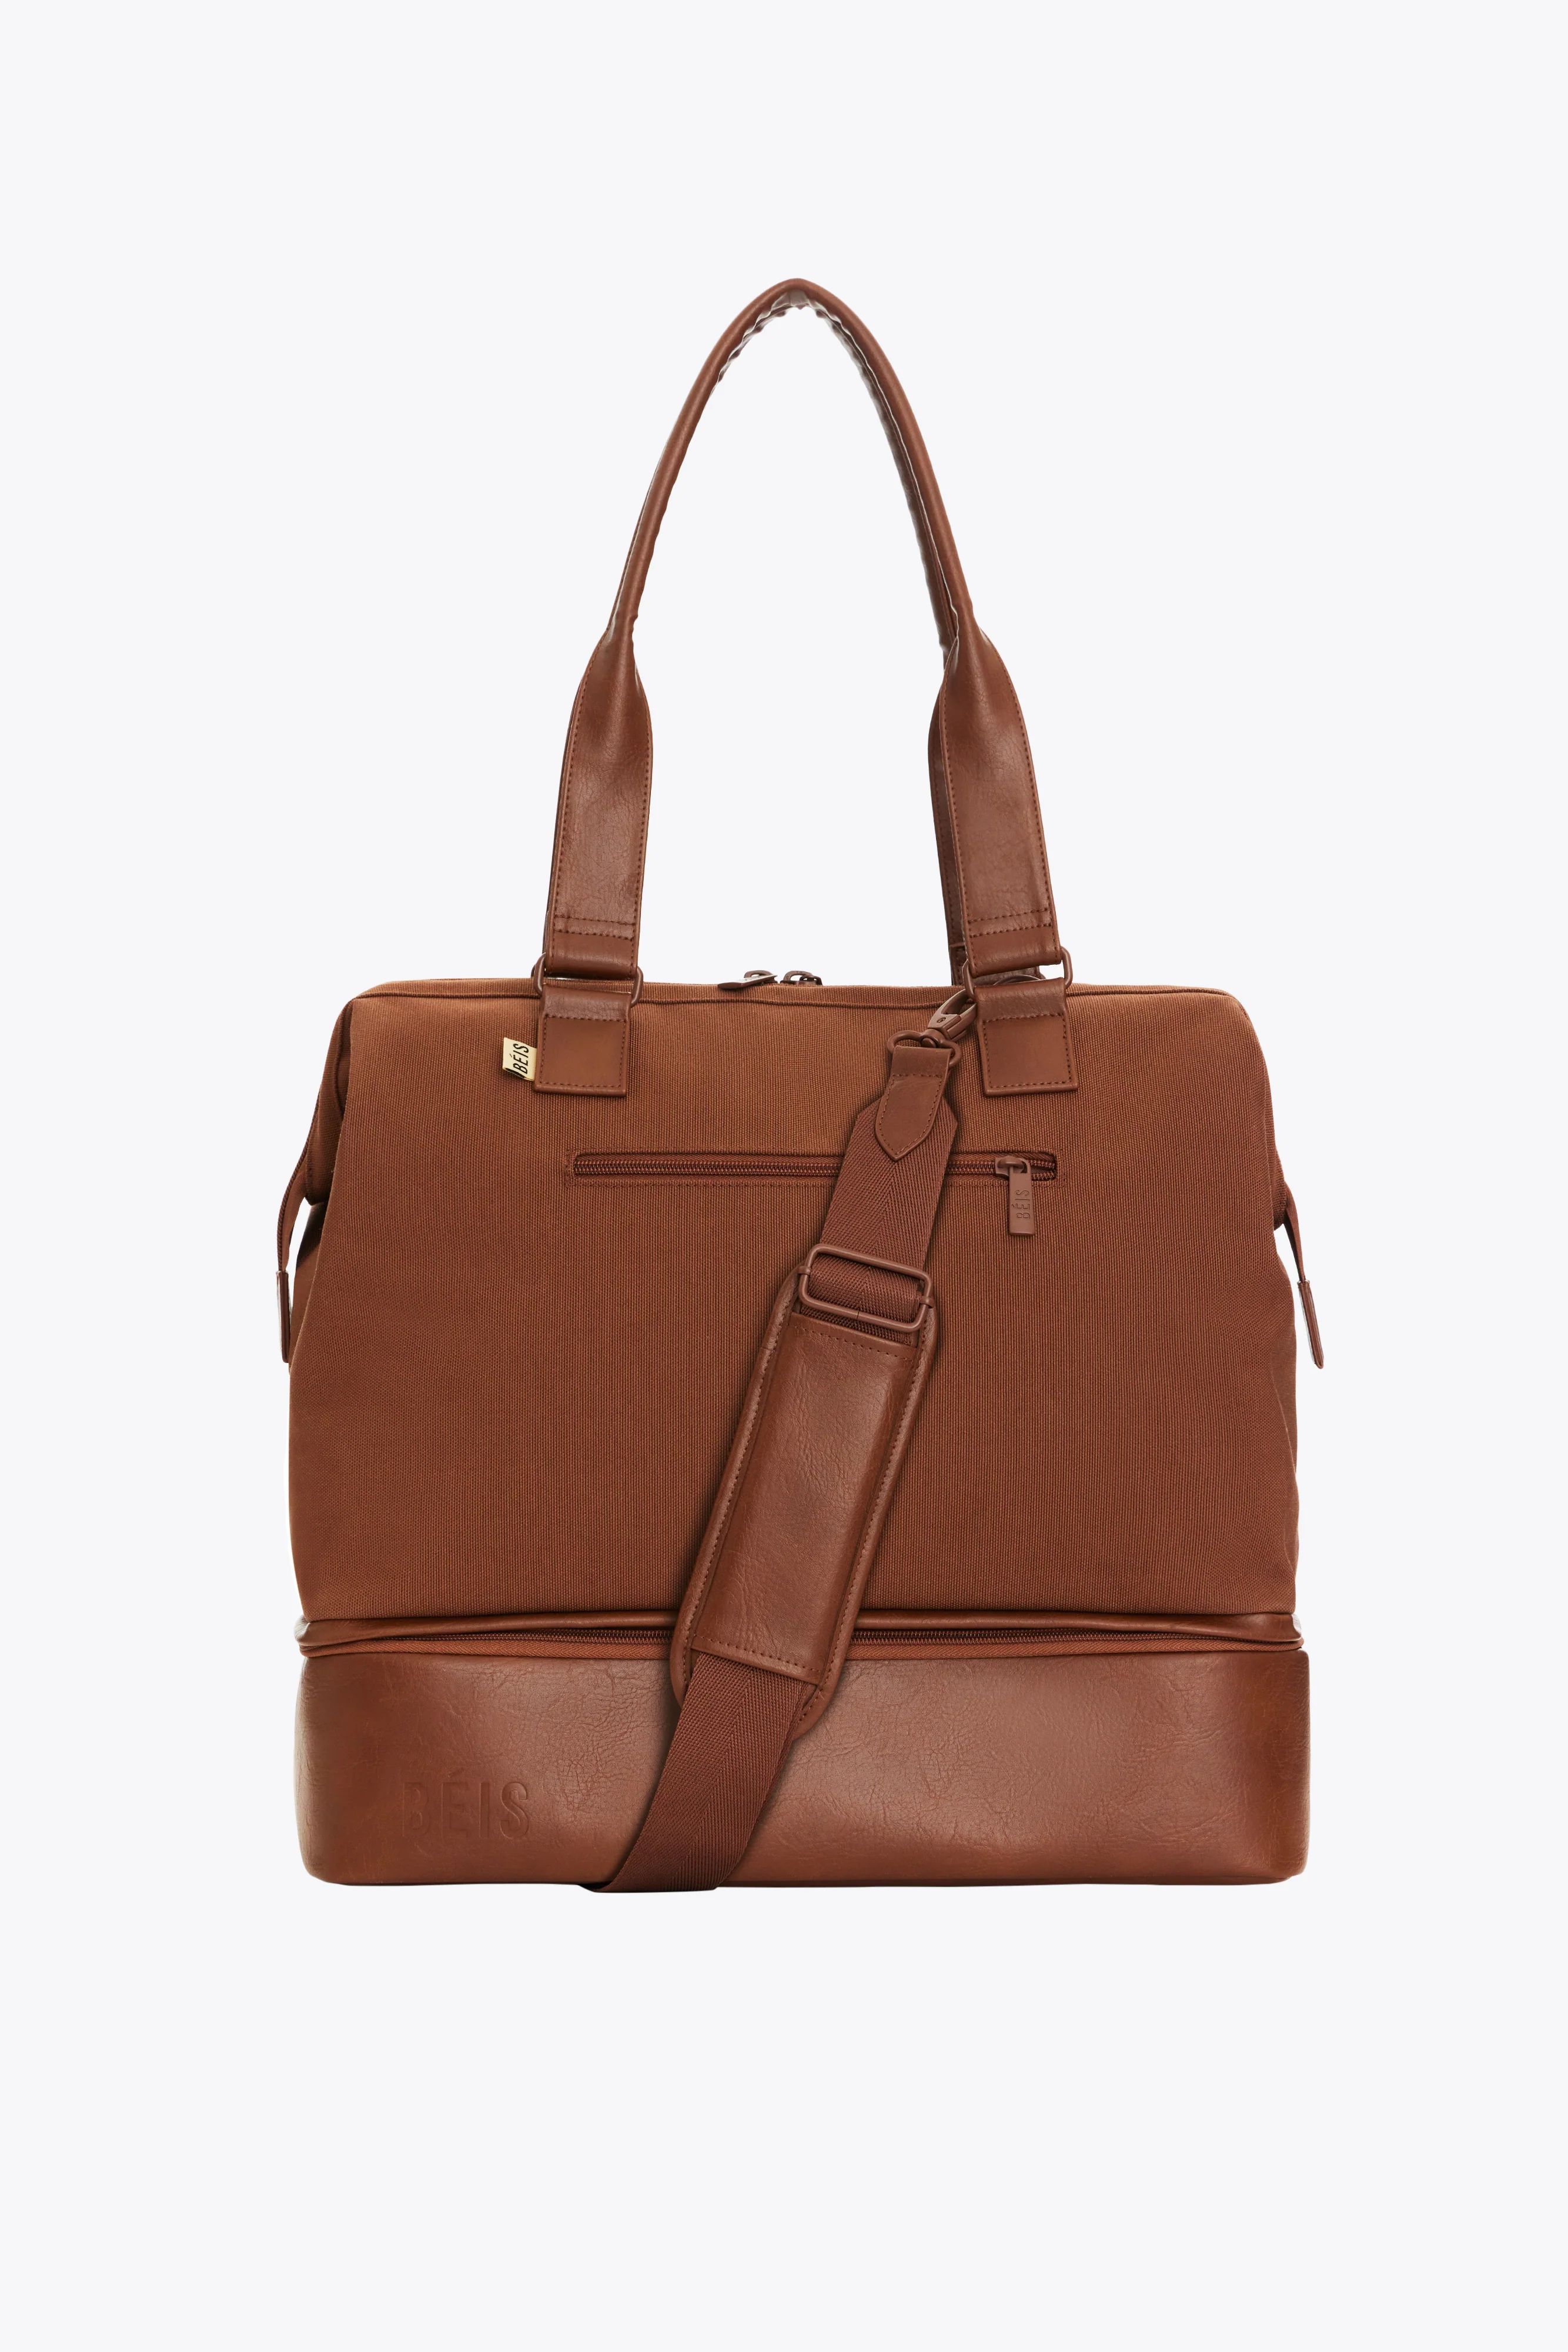 The Convertible Mini Weekender in Maple | BÉIS Travel